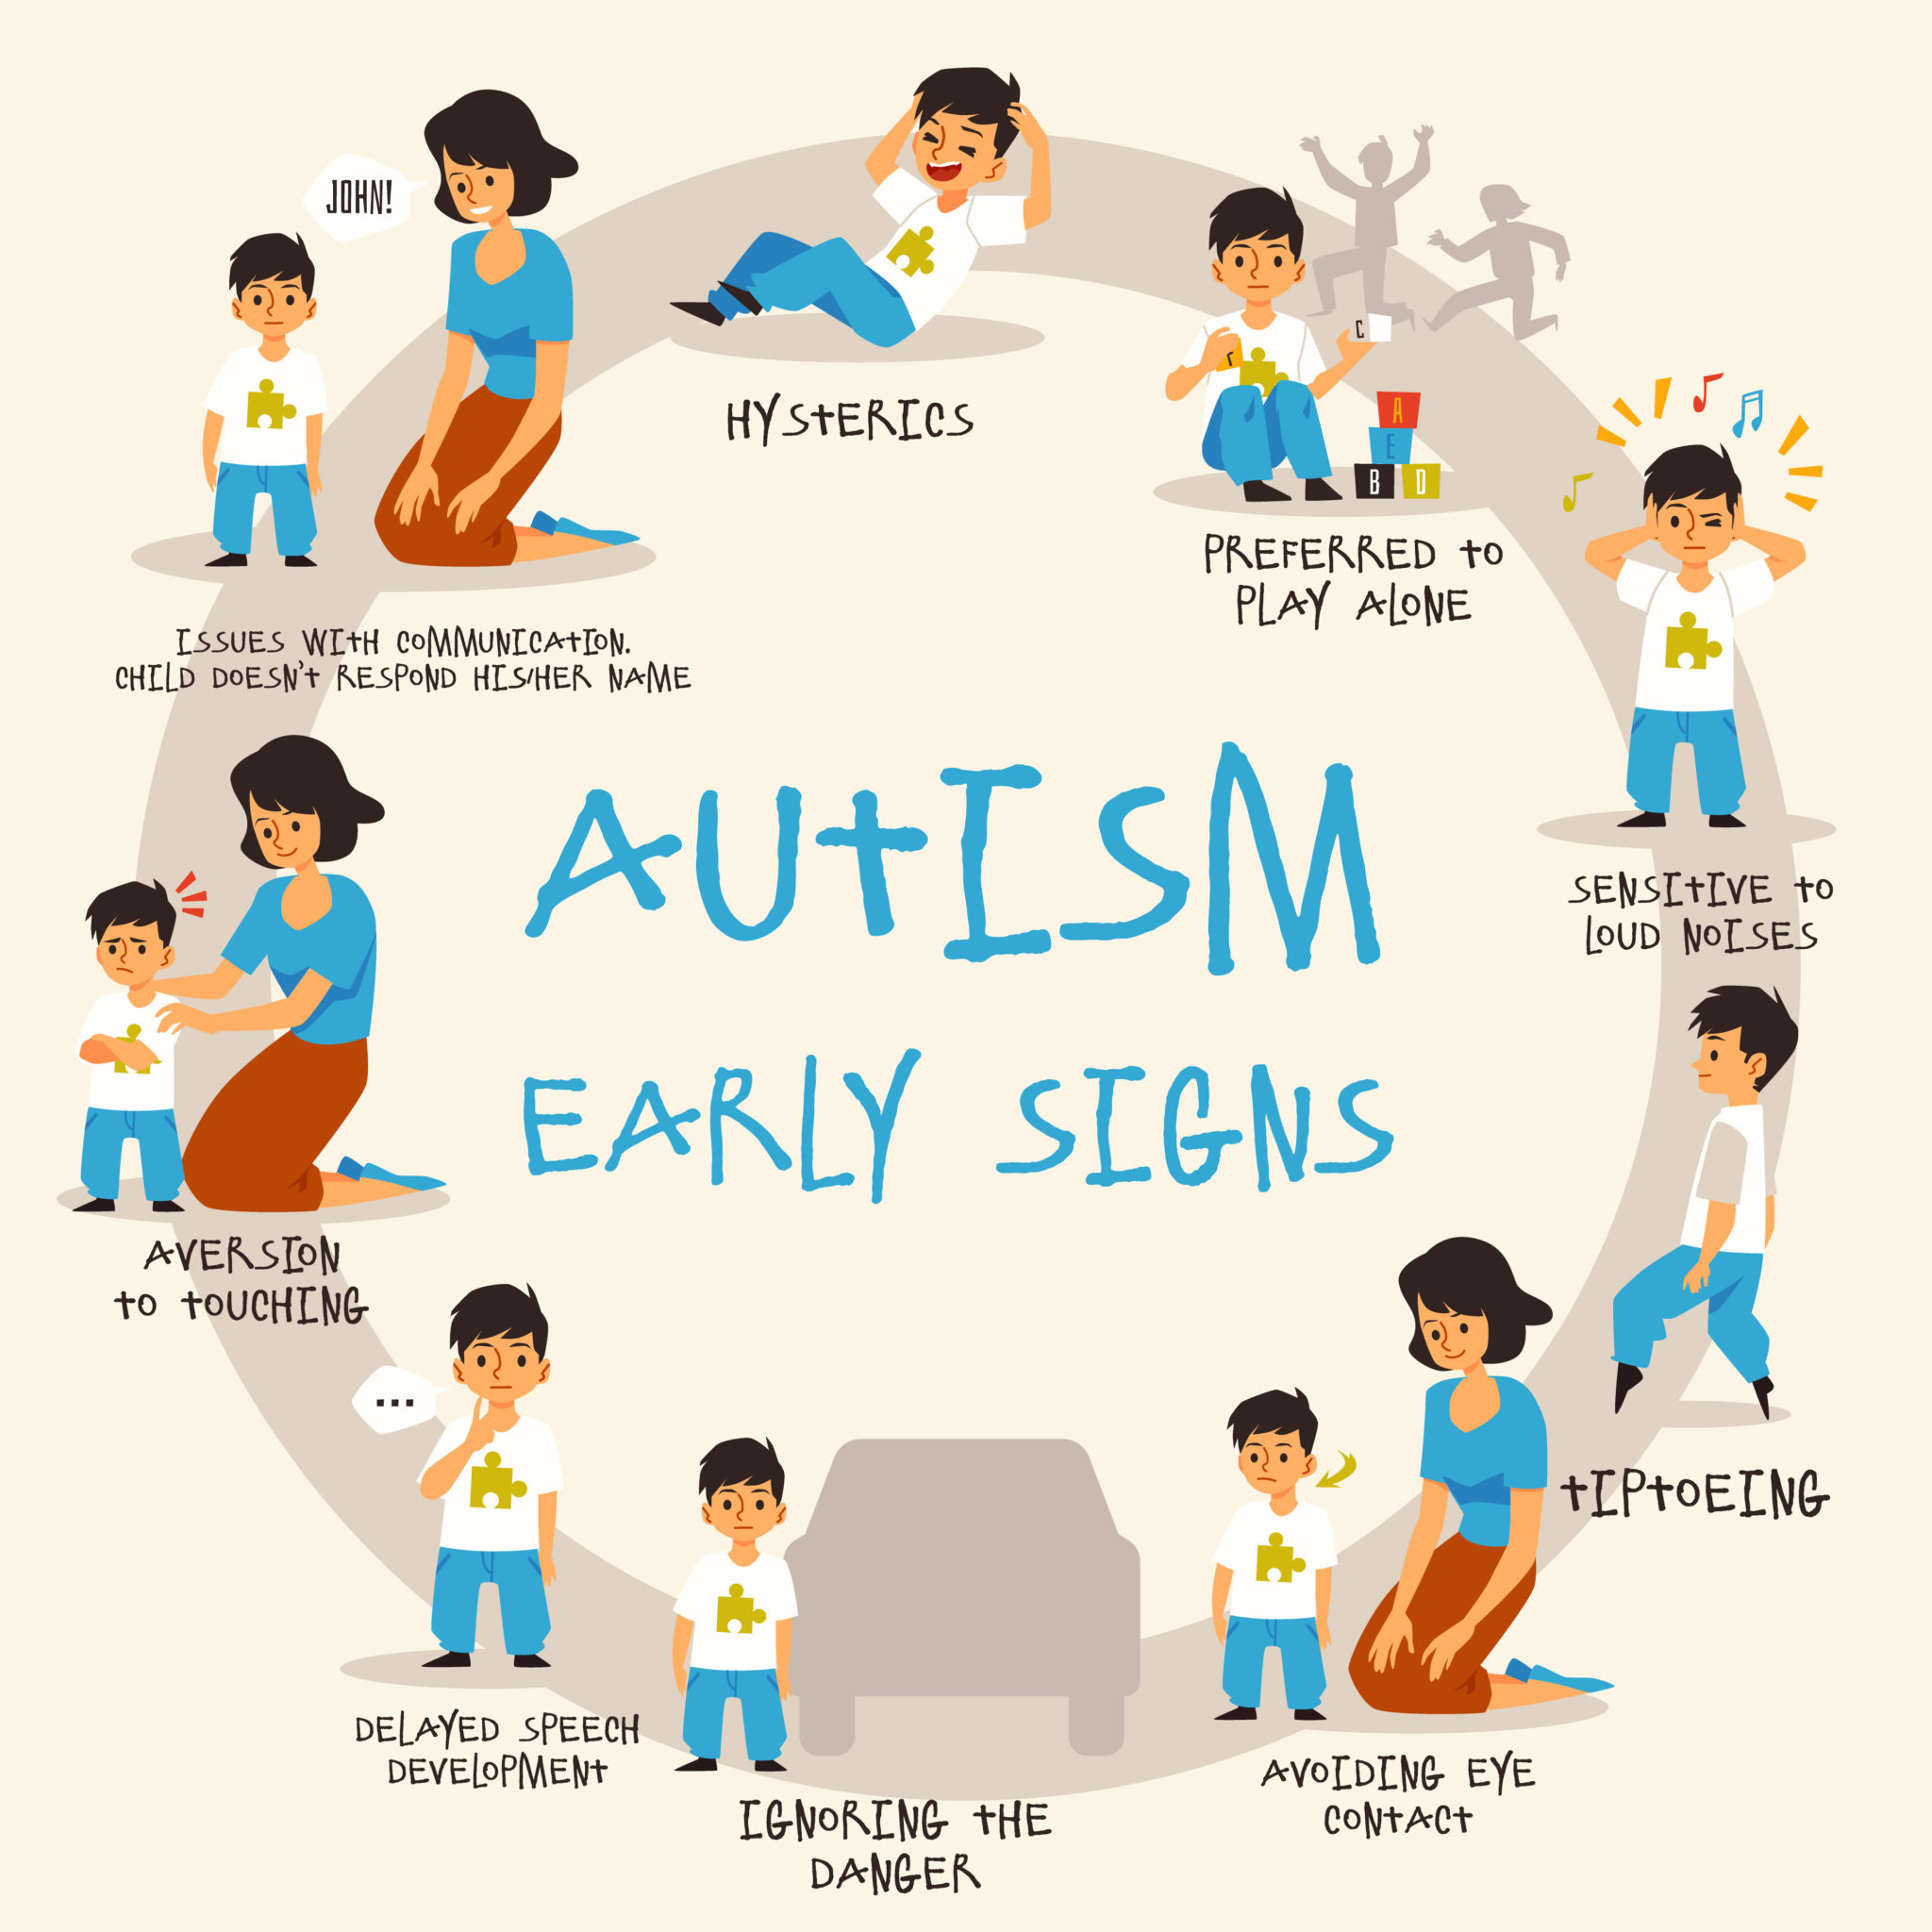 autism-benefits-for-children-cannon-disability-law